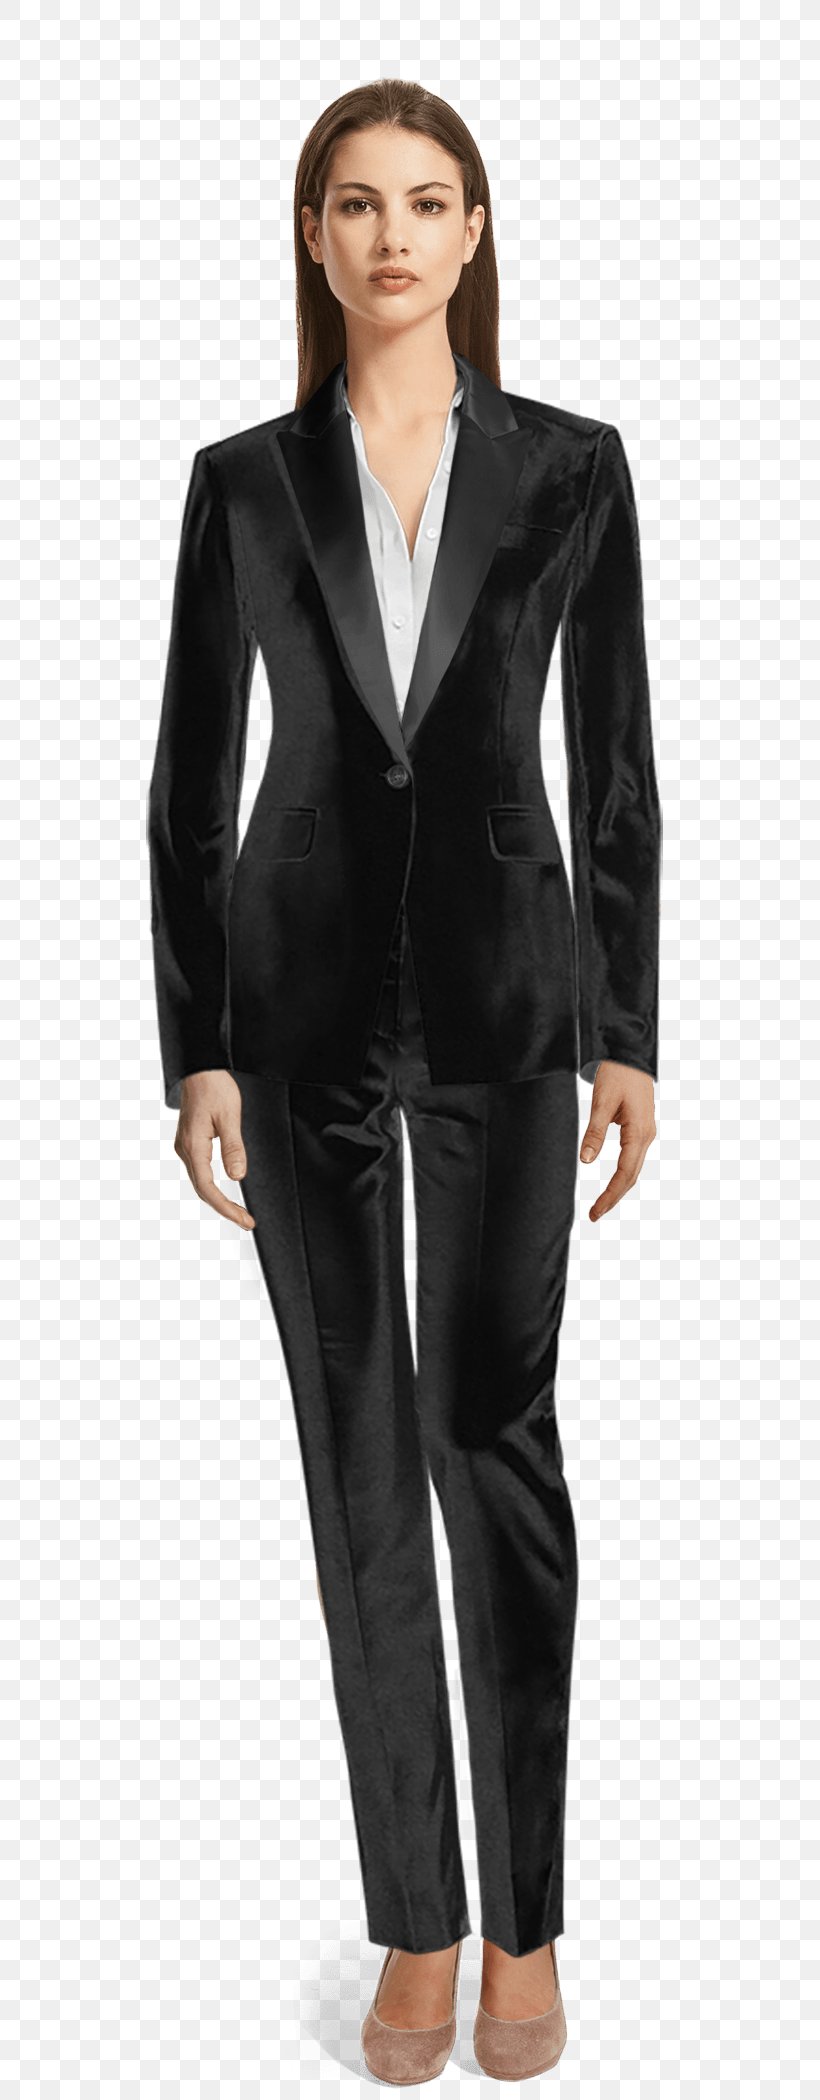 Suit Lapel Tuxedo Blazer Clothing, PNG, 655x2100px, Suit, Blazer, Button, Clothing, Doublebreasted Download Free